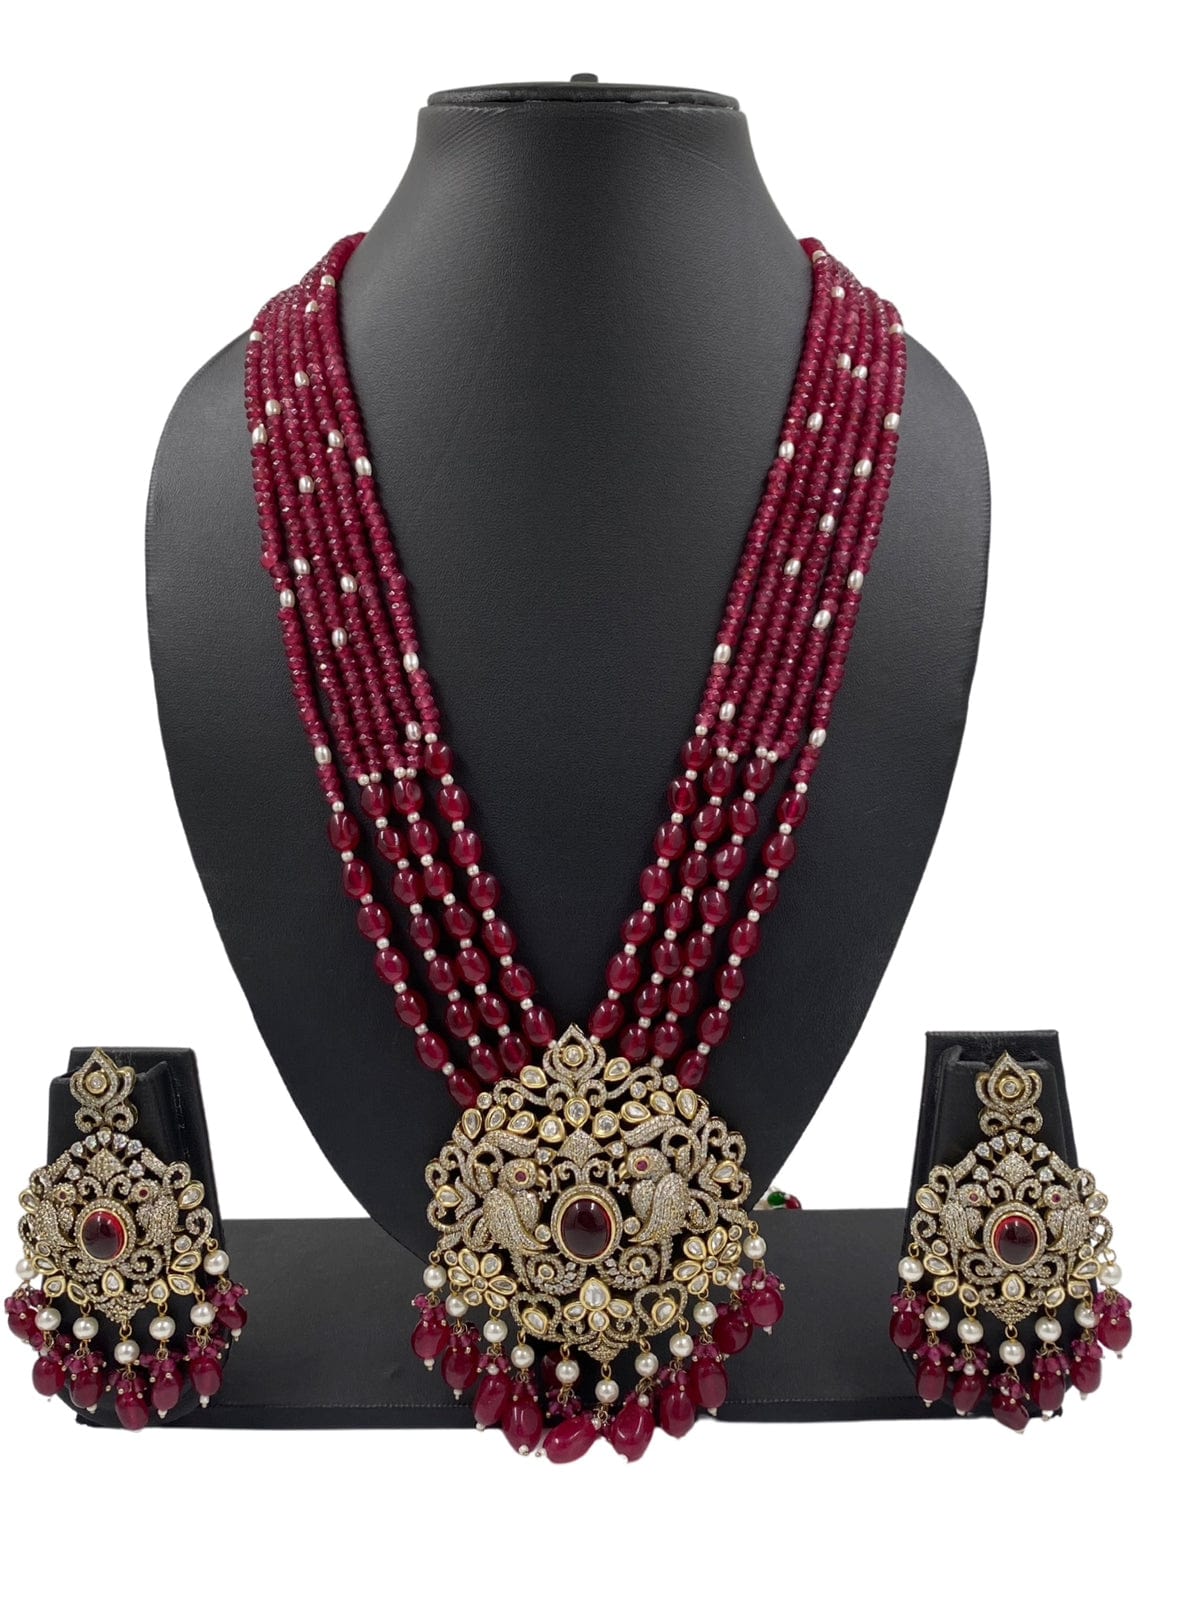 Designer Antique Victorian AD And Polki Pendant Necklace Set For Weddings Victorian Necklace Sets